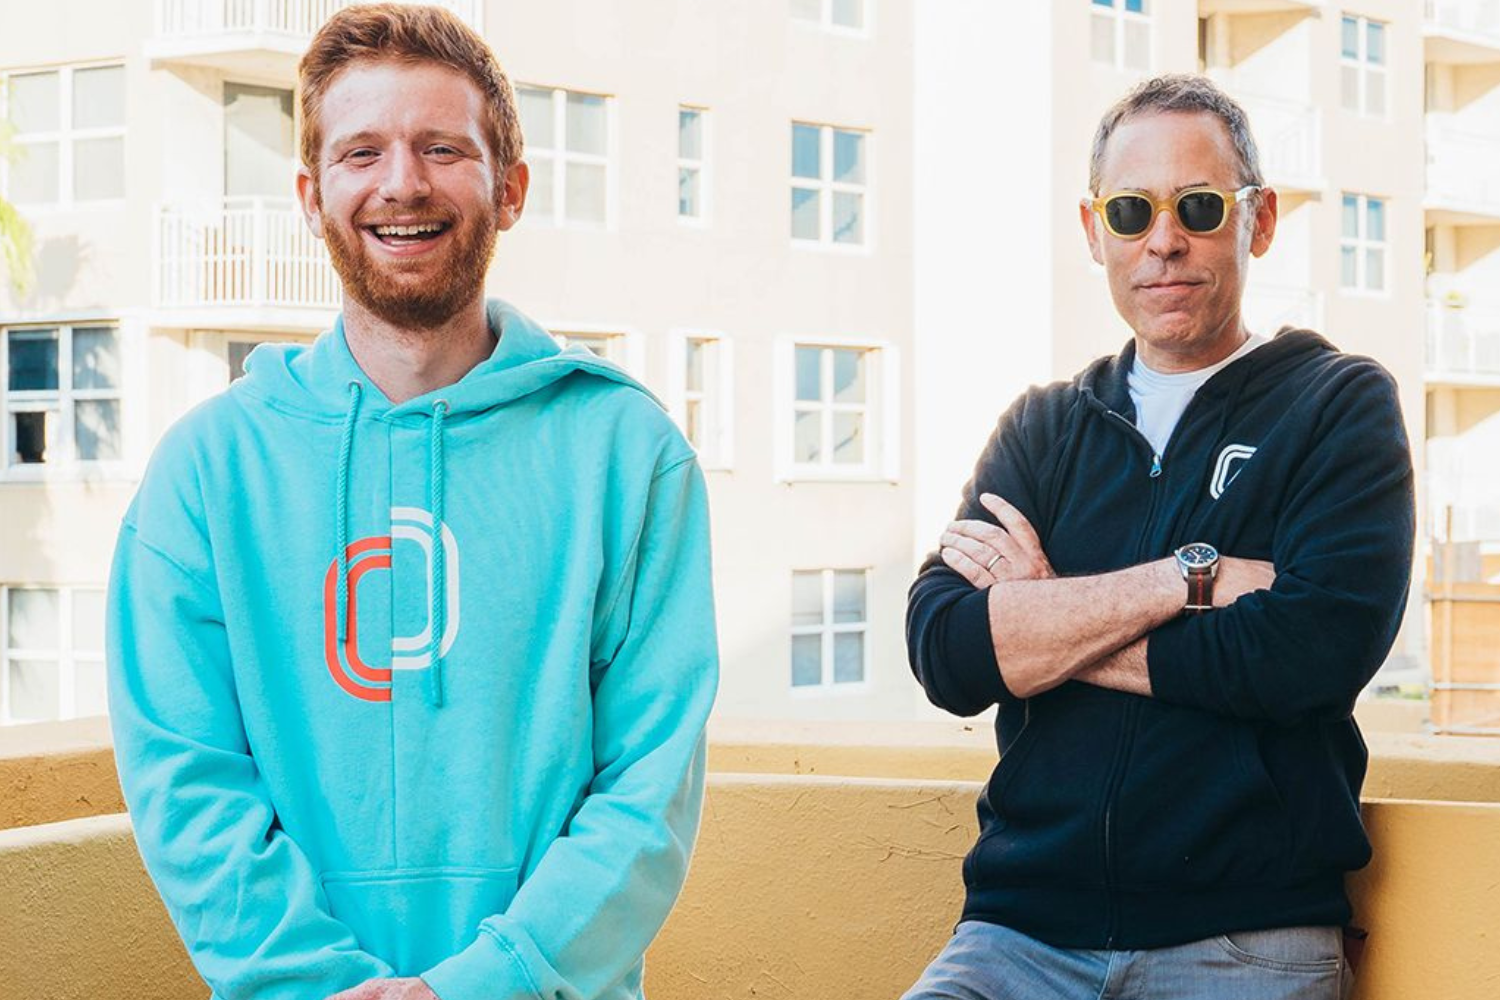 Overtime co-founders standing side by side